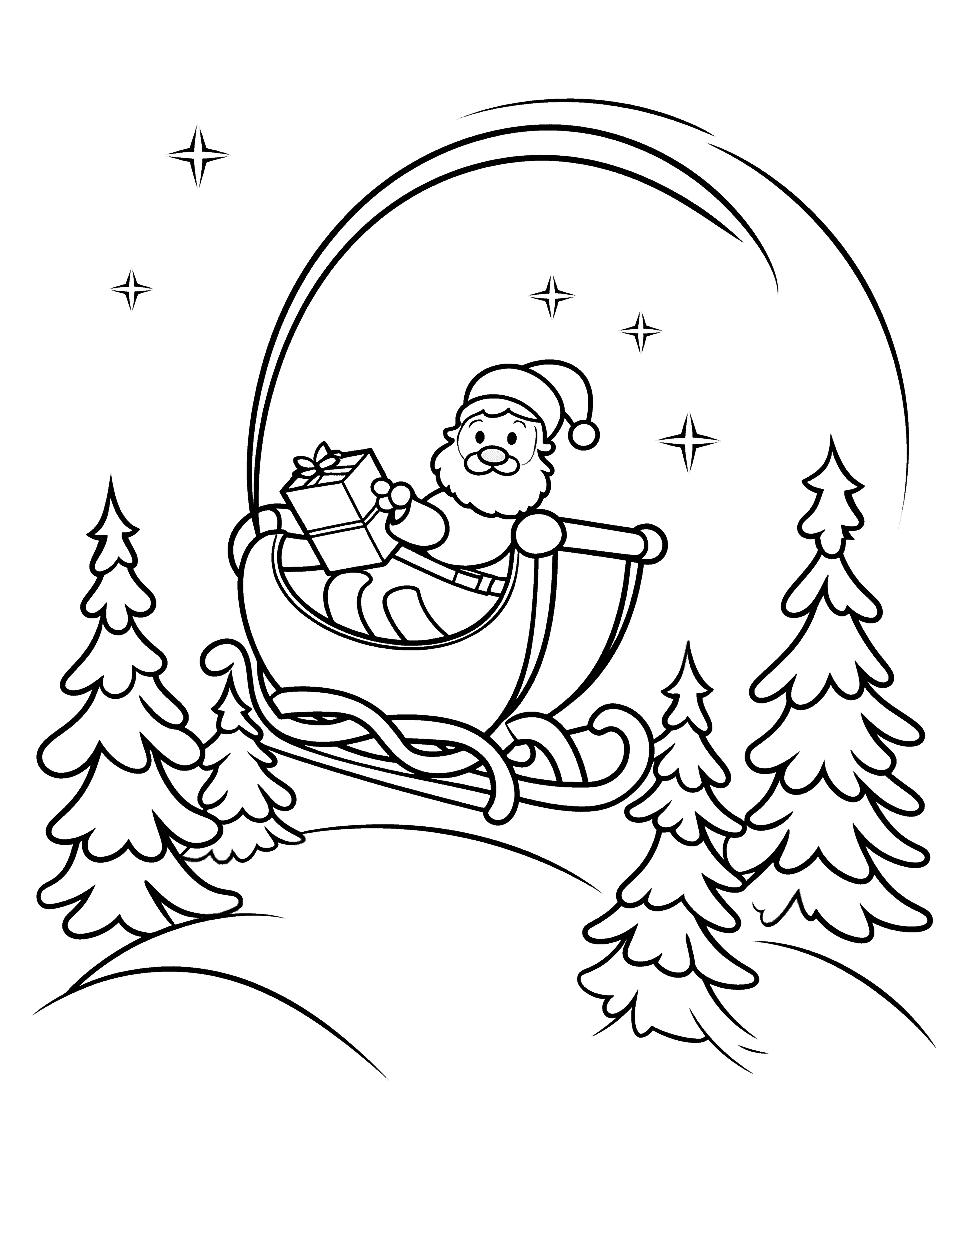 Easy Santa Sleigh Christmas Coloring Page - An easy-to-color image of Santa riding his sleigh across the starry night sky.